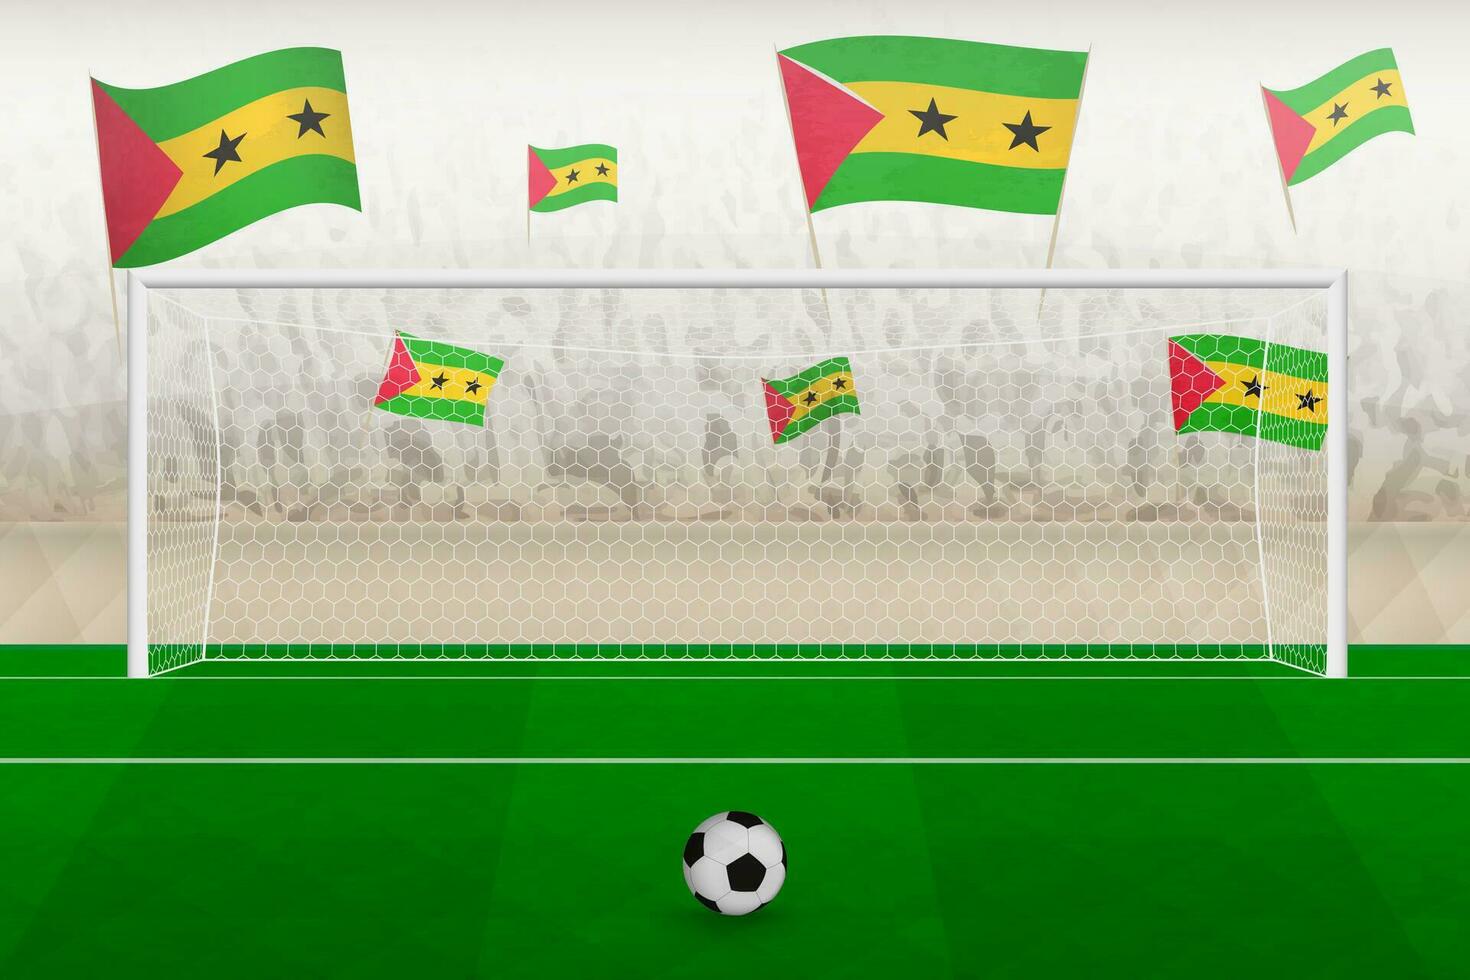 Sao Tome and Principe football team fans with flags of Sao Tome and Principe cheering on stadium, penalty kick concept in a soccer match. vector